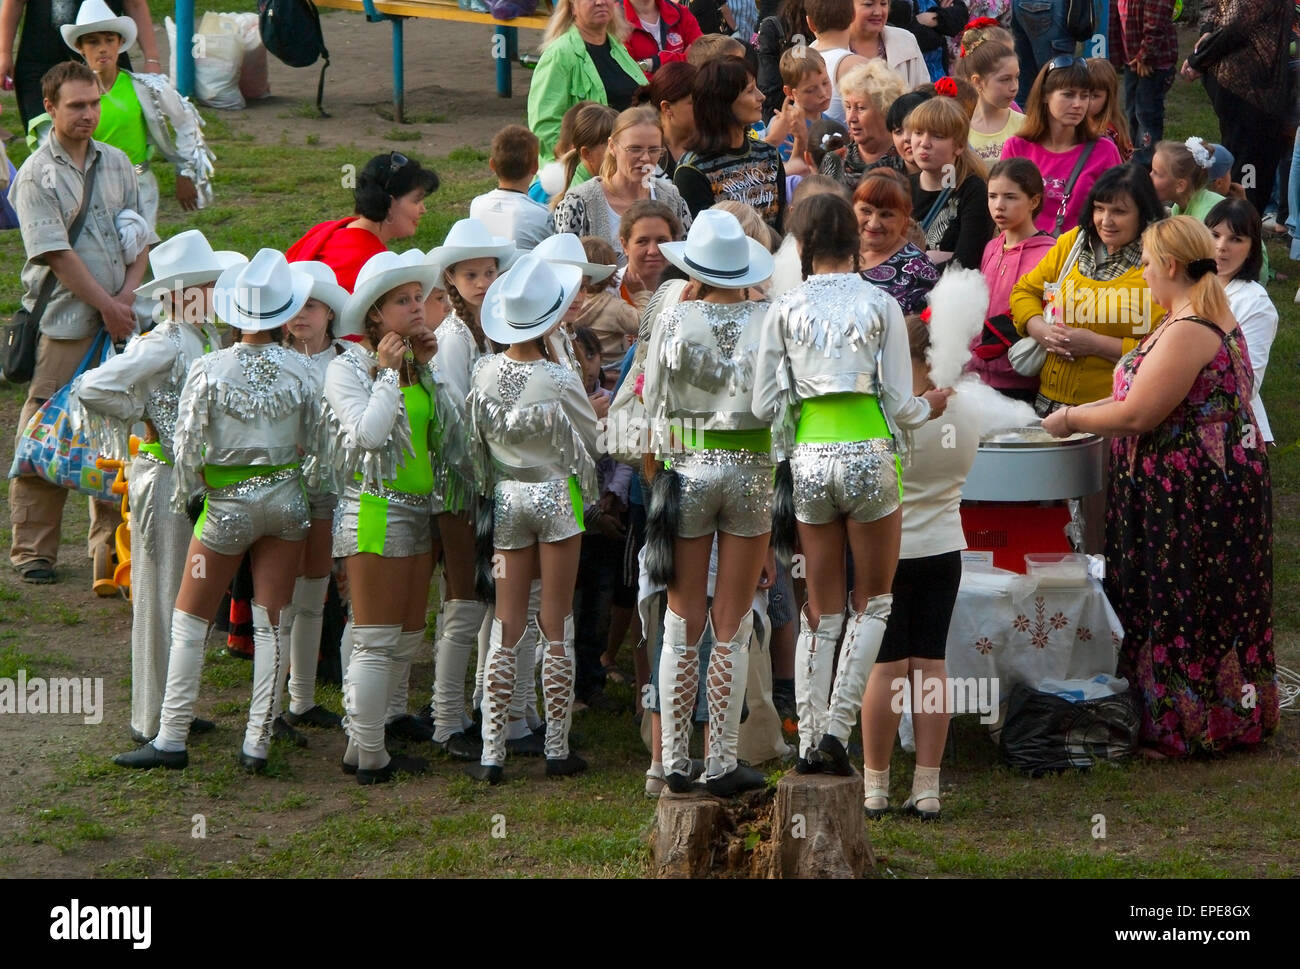 Girls in costumes at the festival. Stock Photo